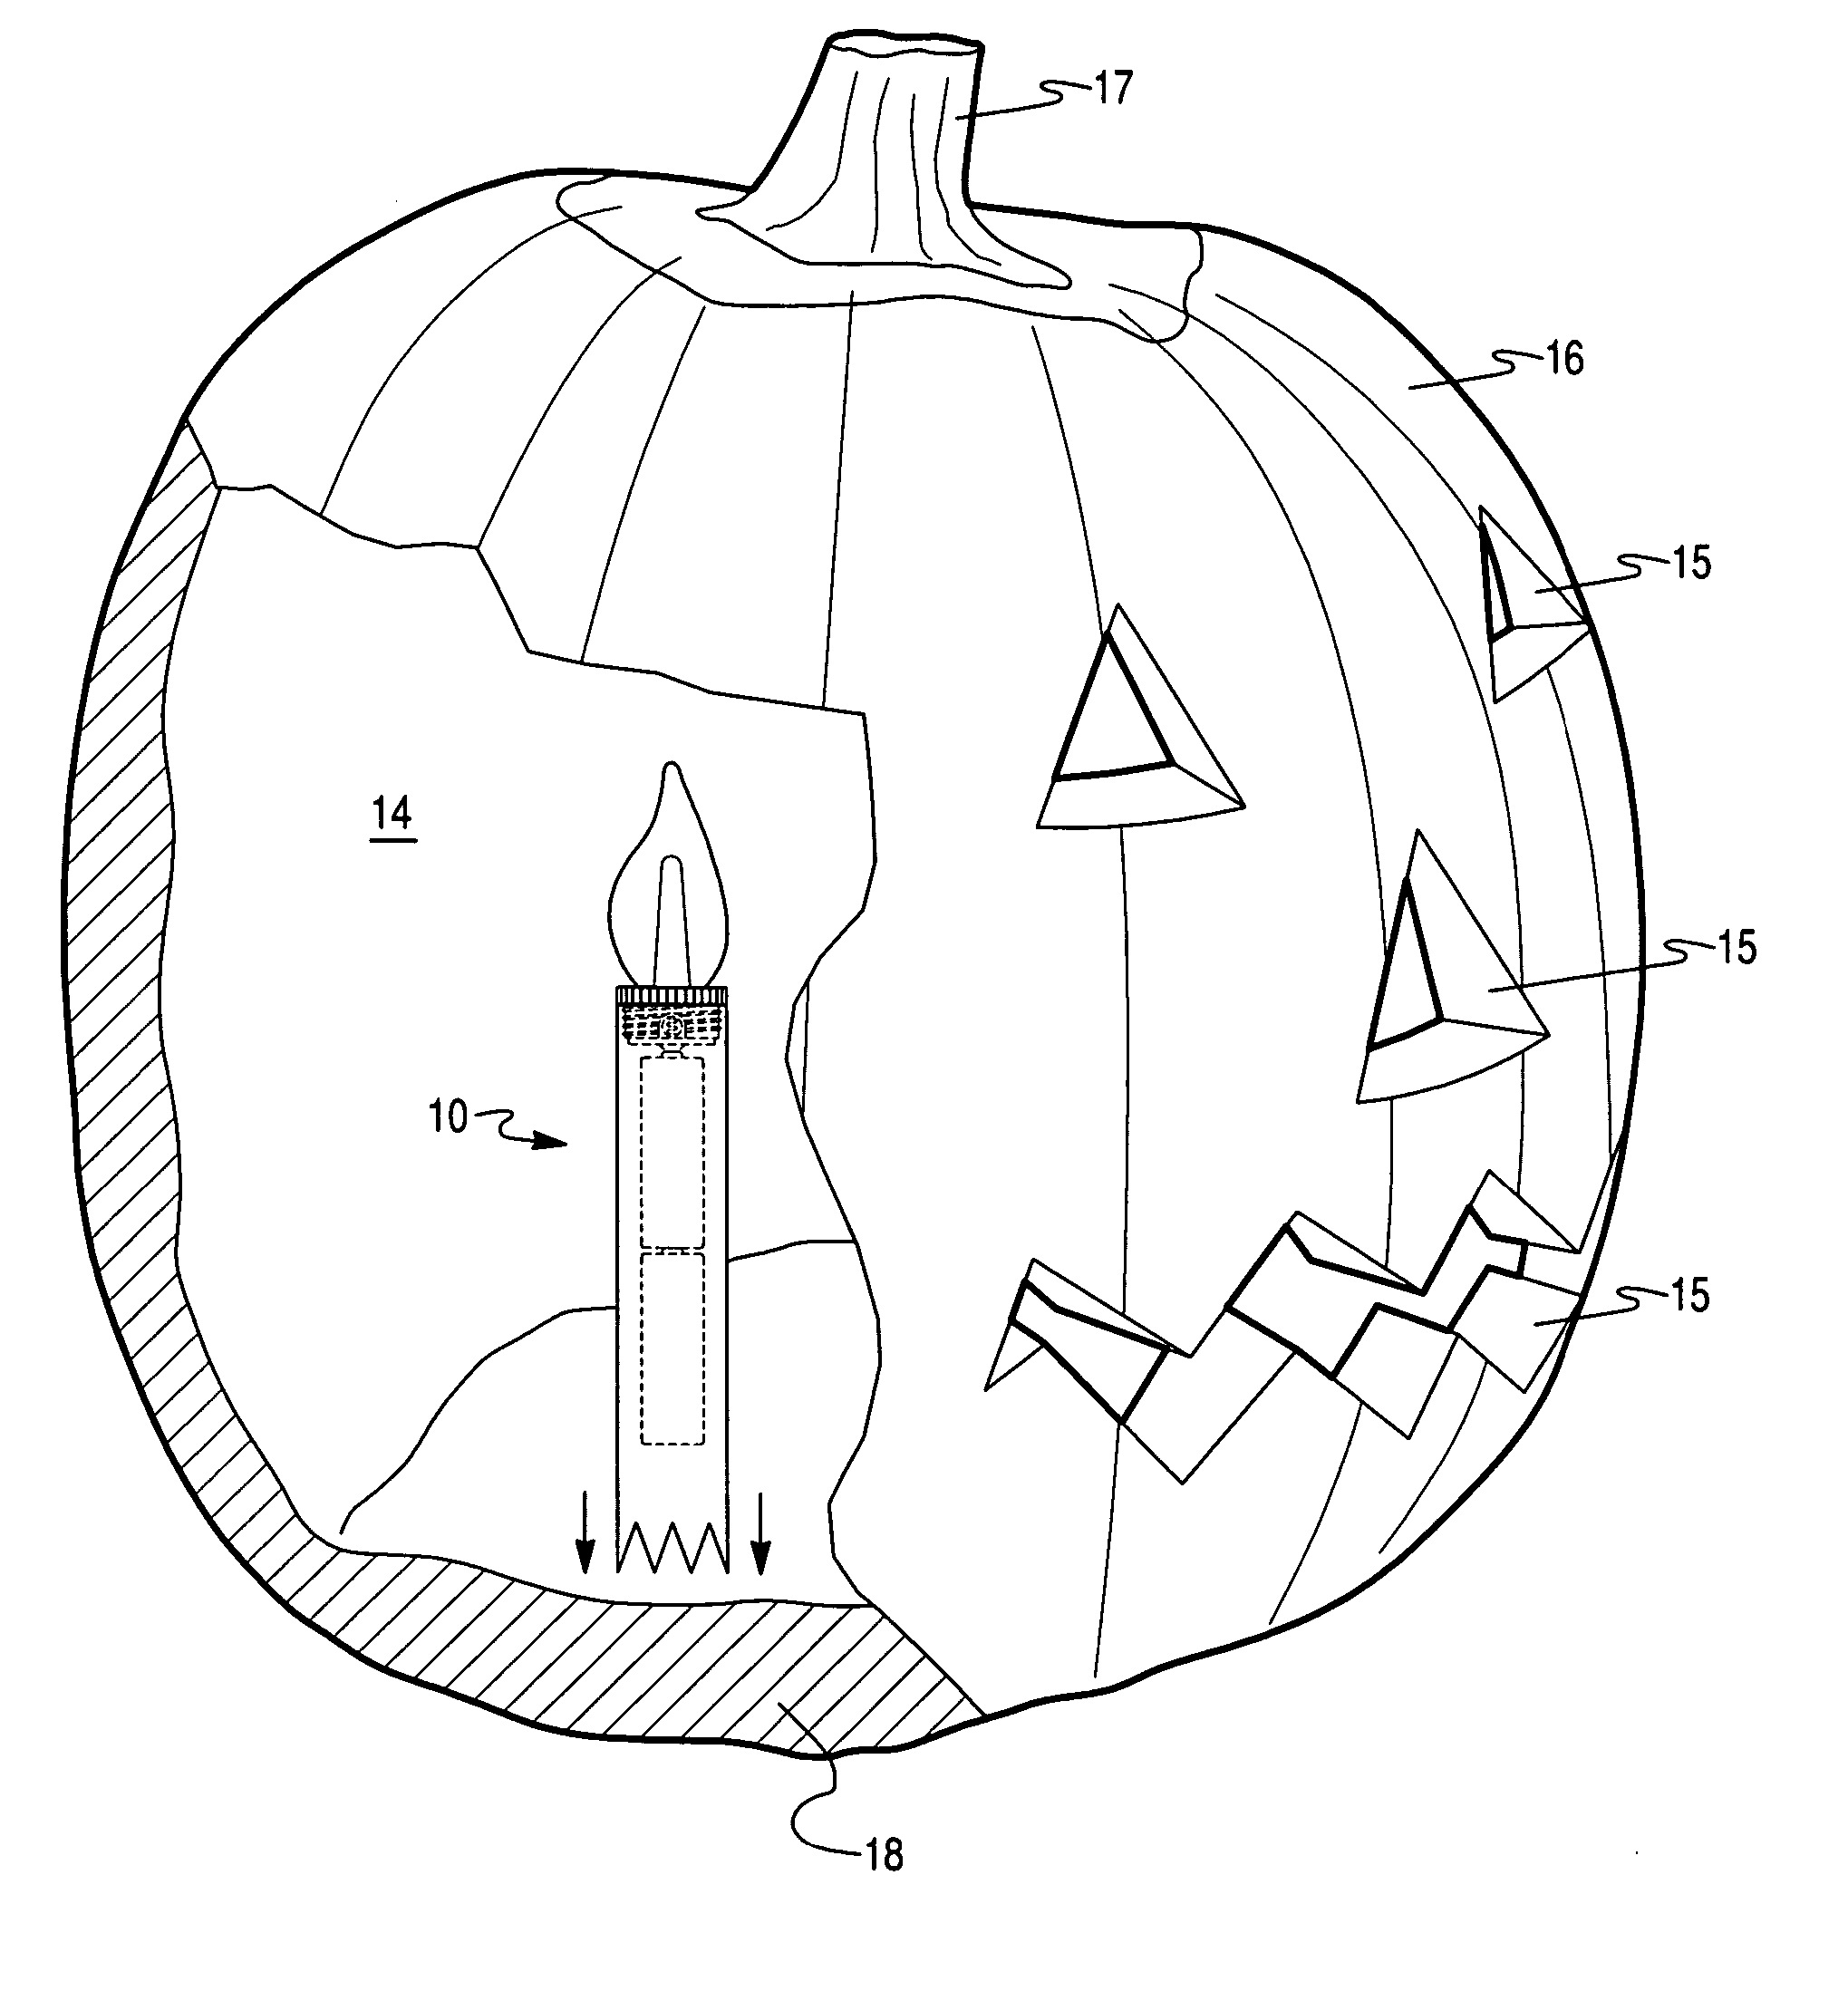 Lighting device for pumpkins and other similar articles